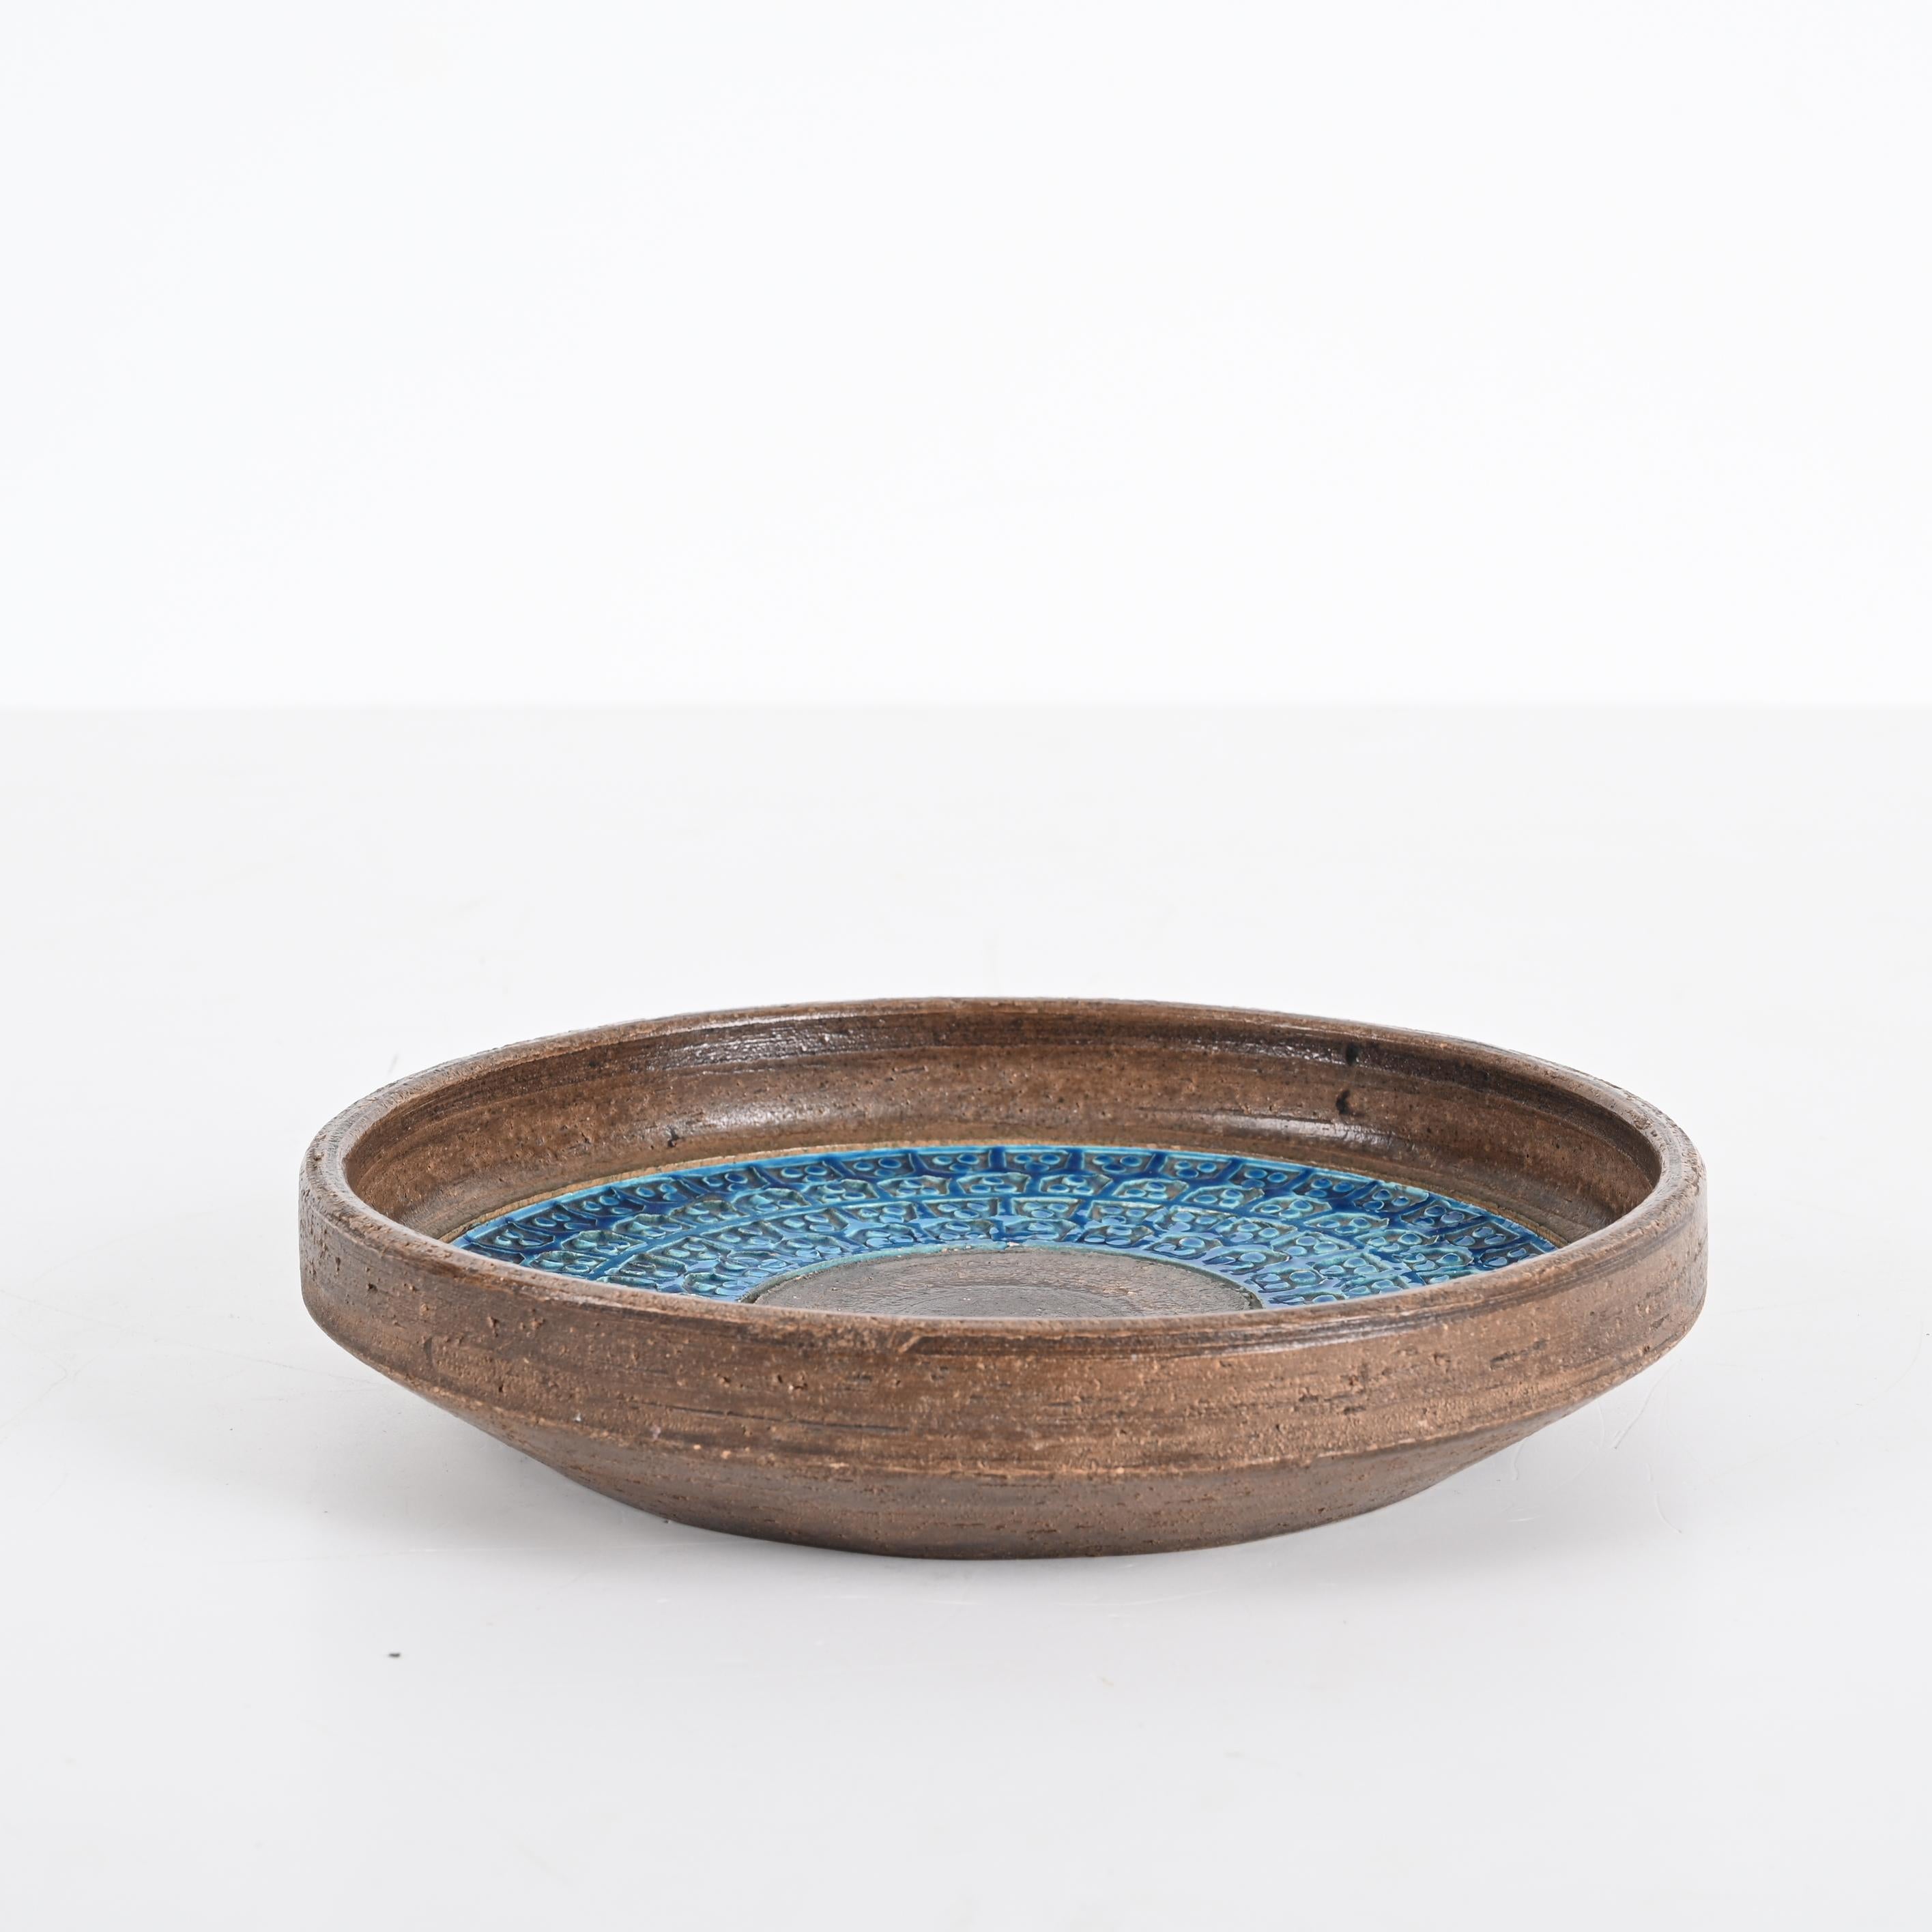 Midcentury round blue and brown ceramic centrepiece. Aldo Londi designed this fantastic piece in Italy during the 1960s for Bitossi.

This fantastic item is magnificent because the brilliant blue mixes wonderfully with the brown elements, plus the